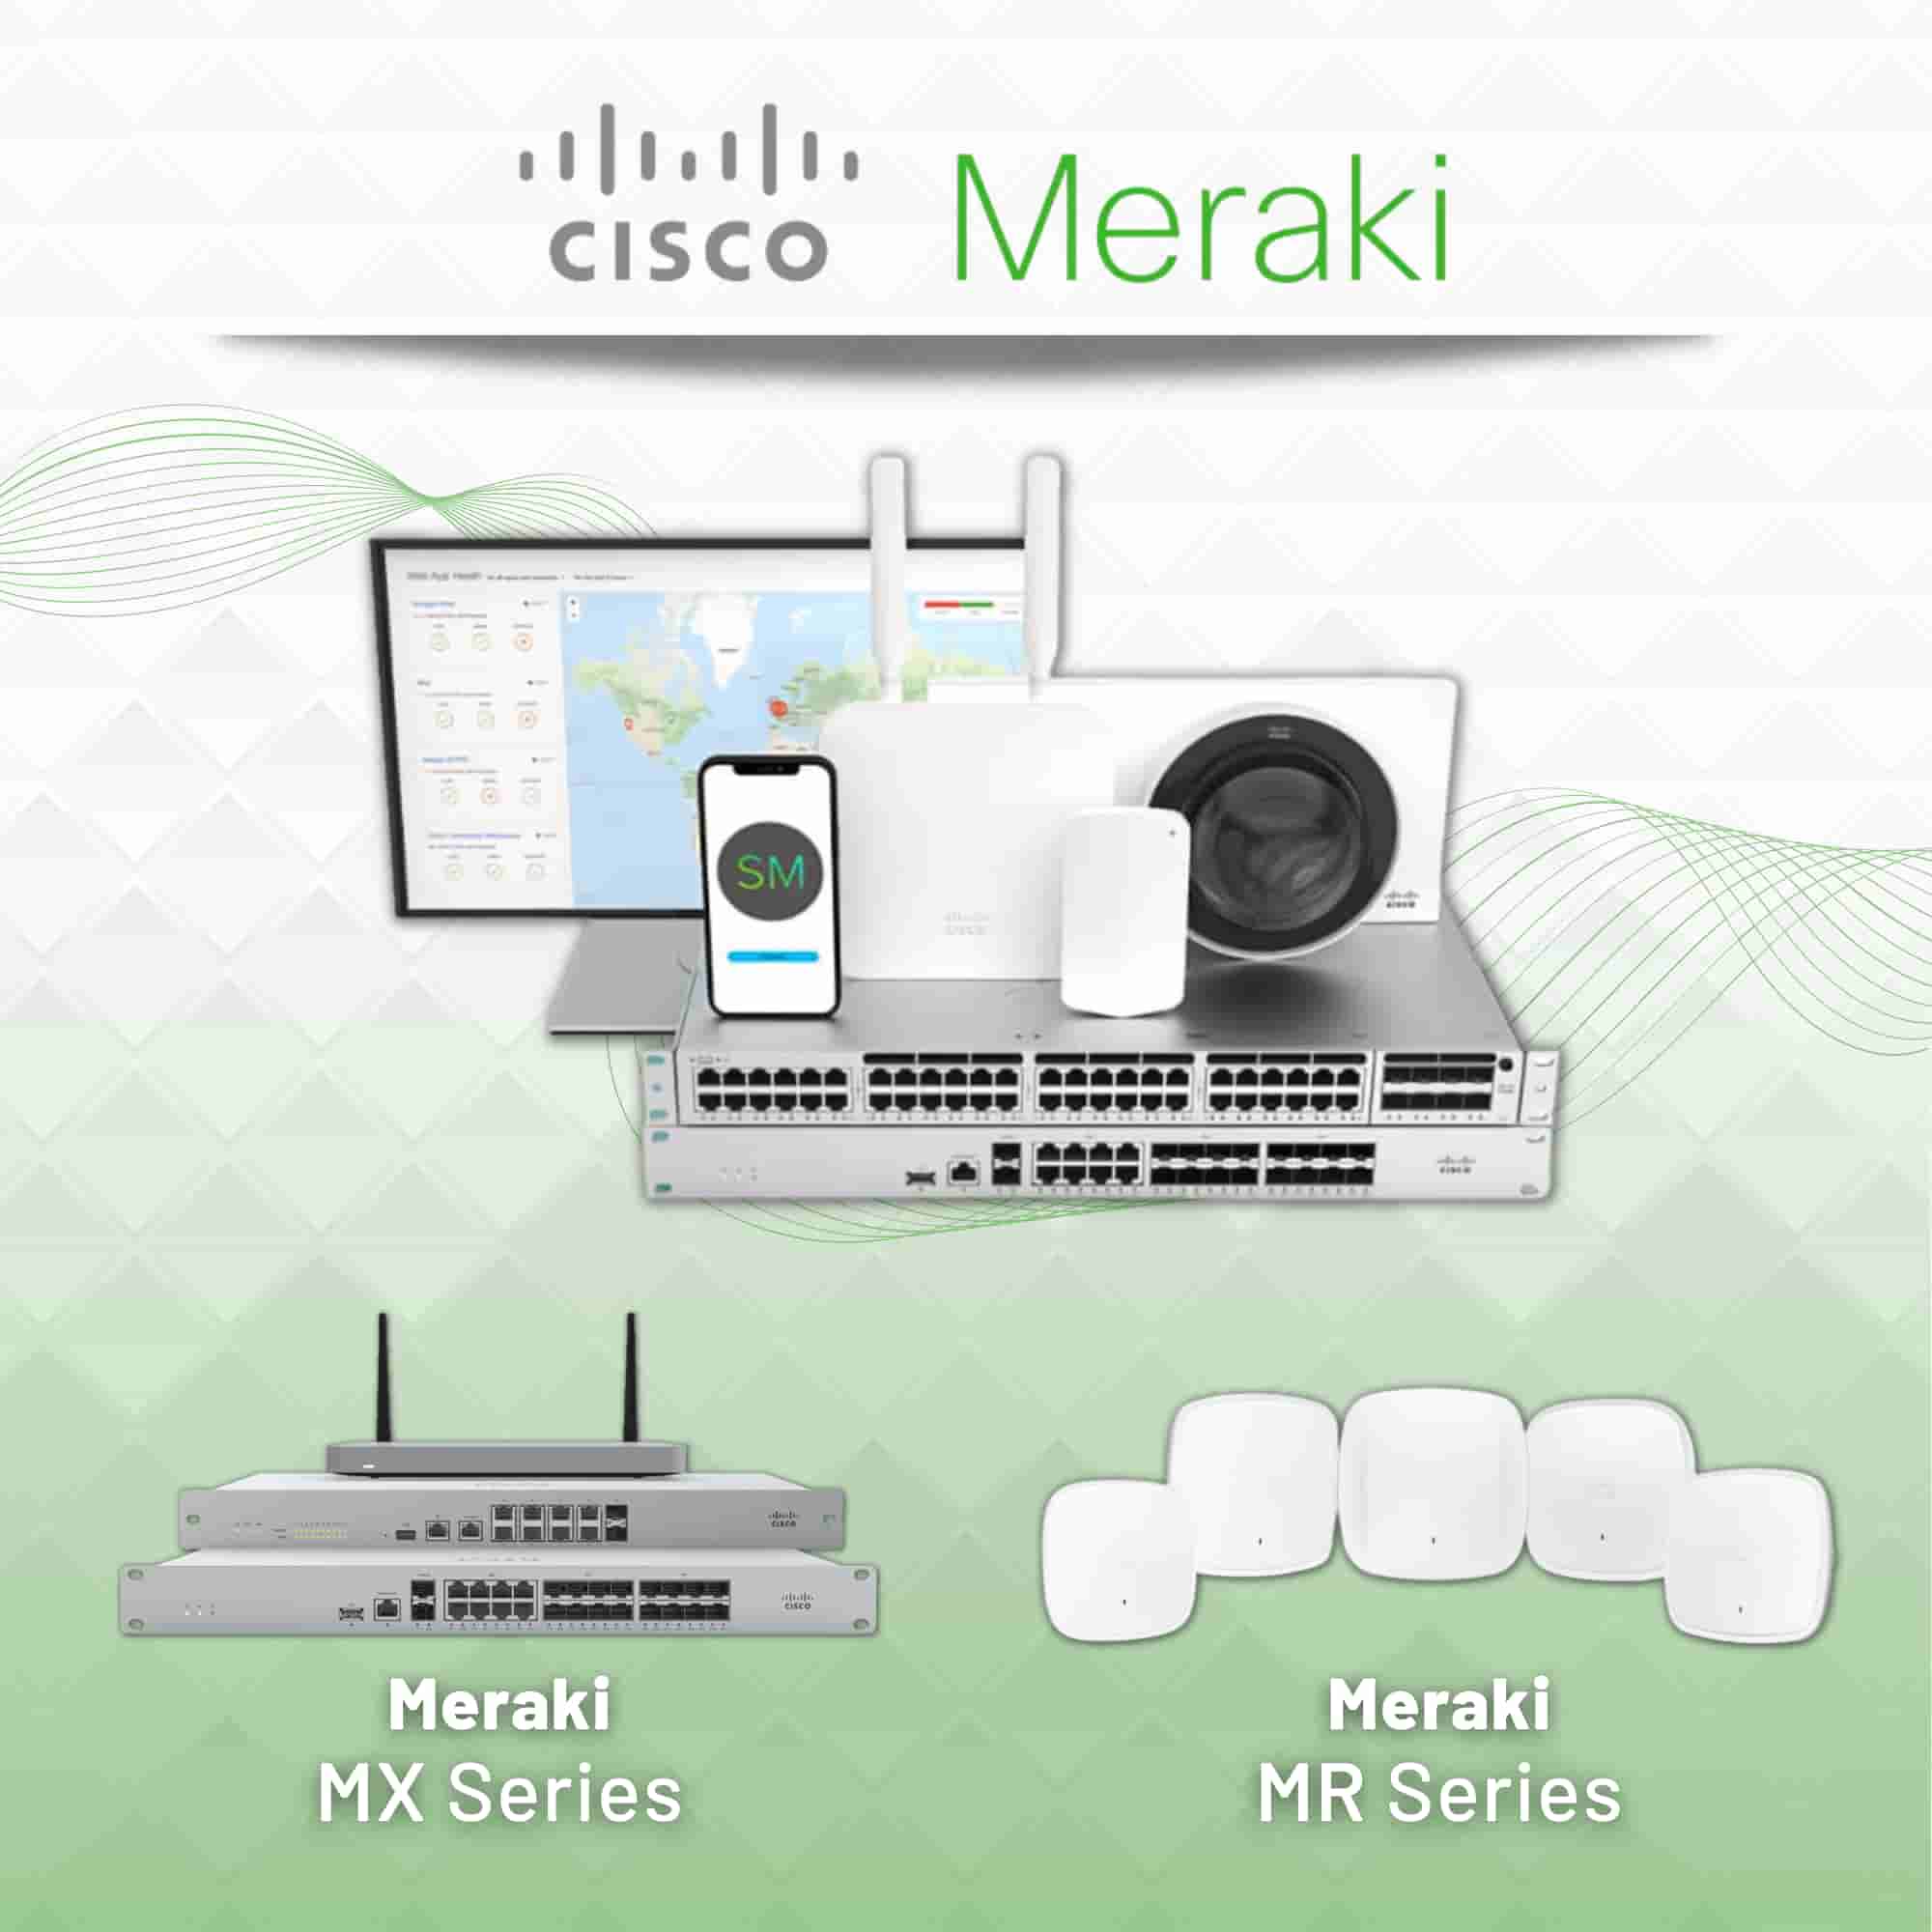 What Are The Latest Meraki Products